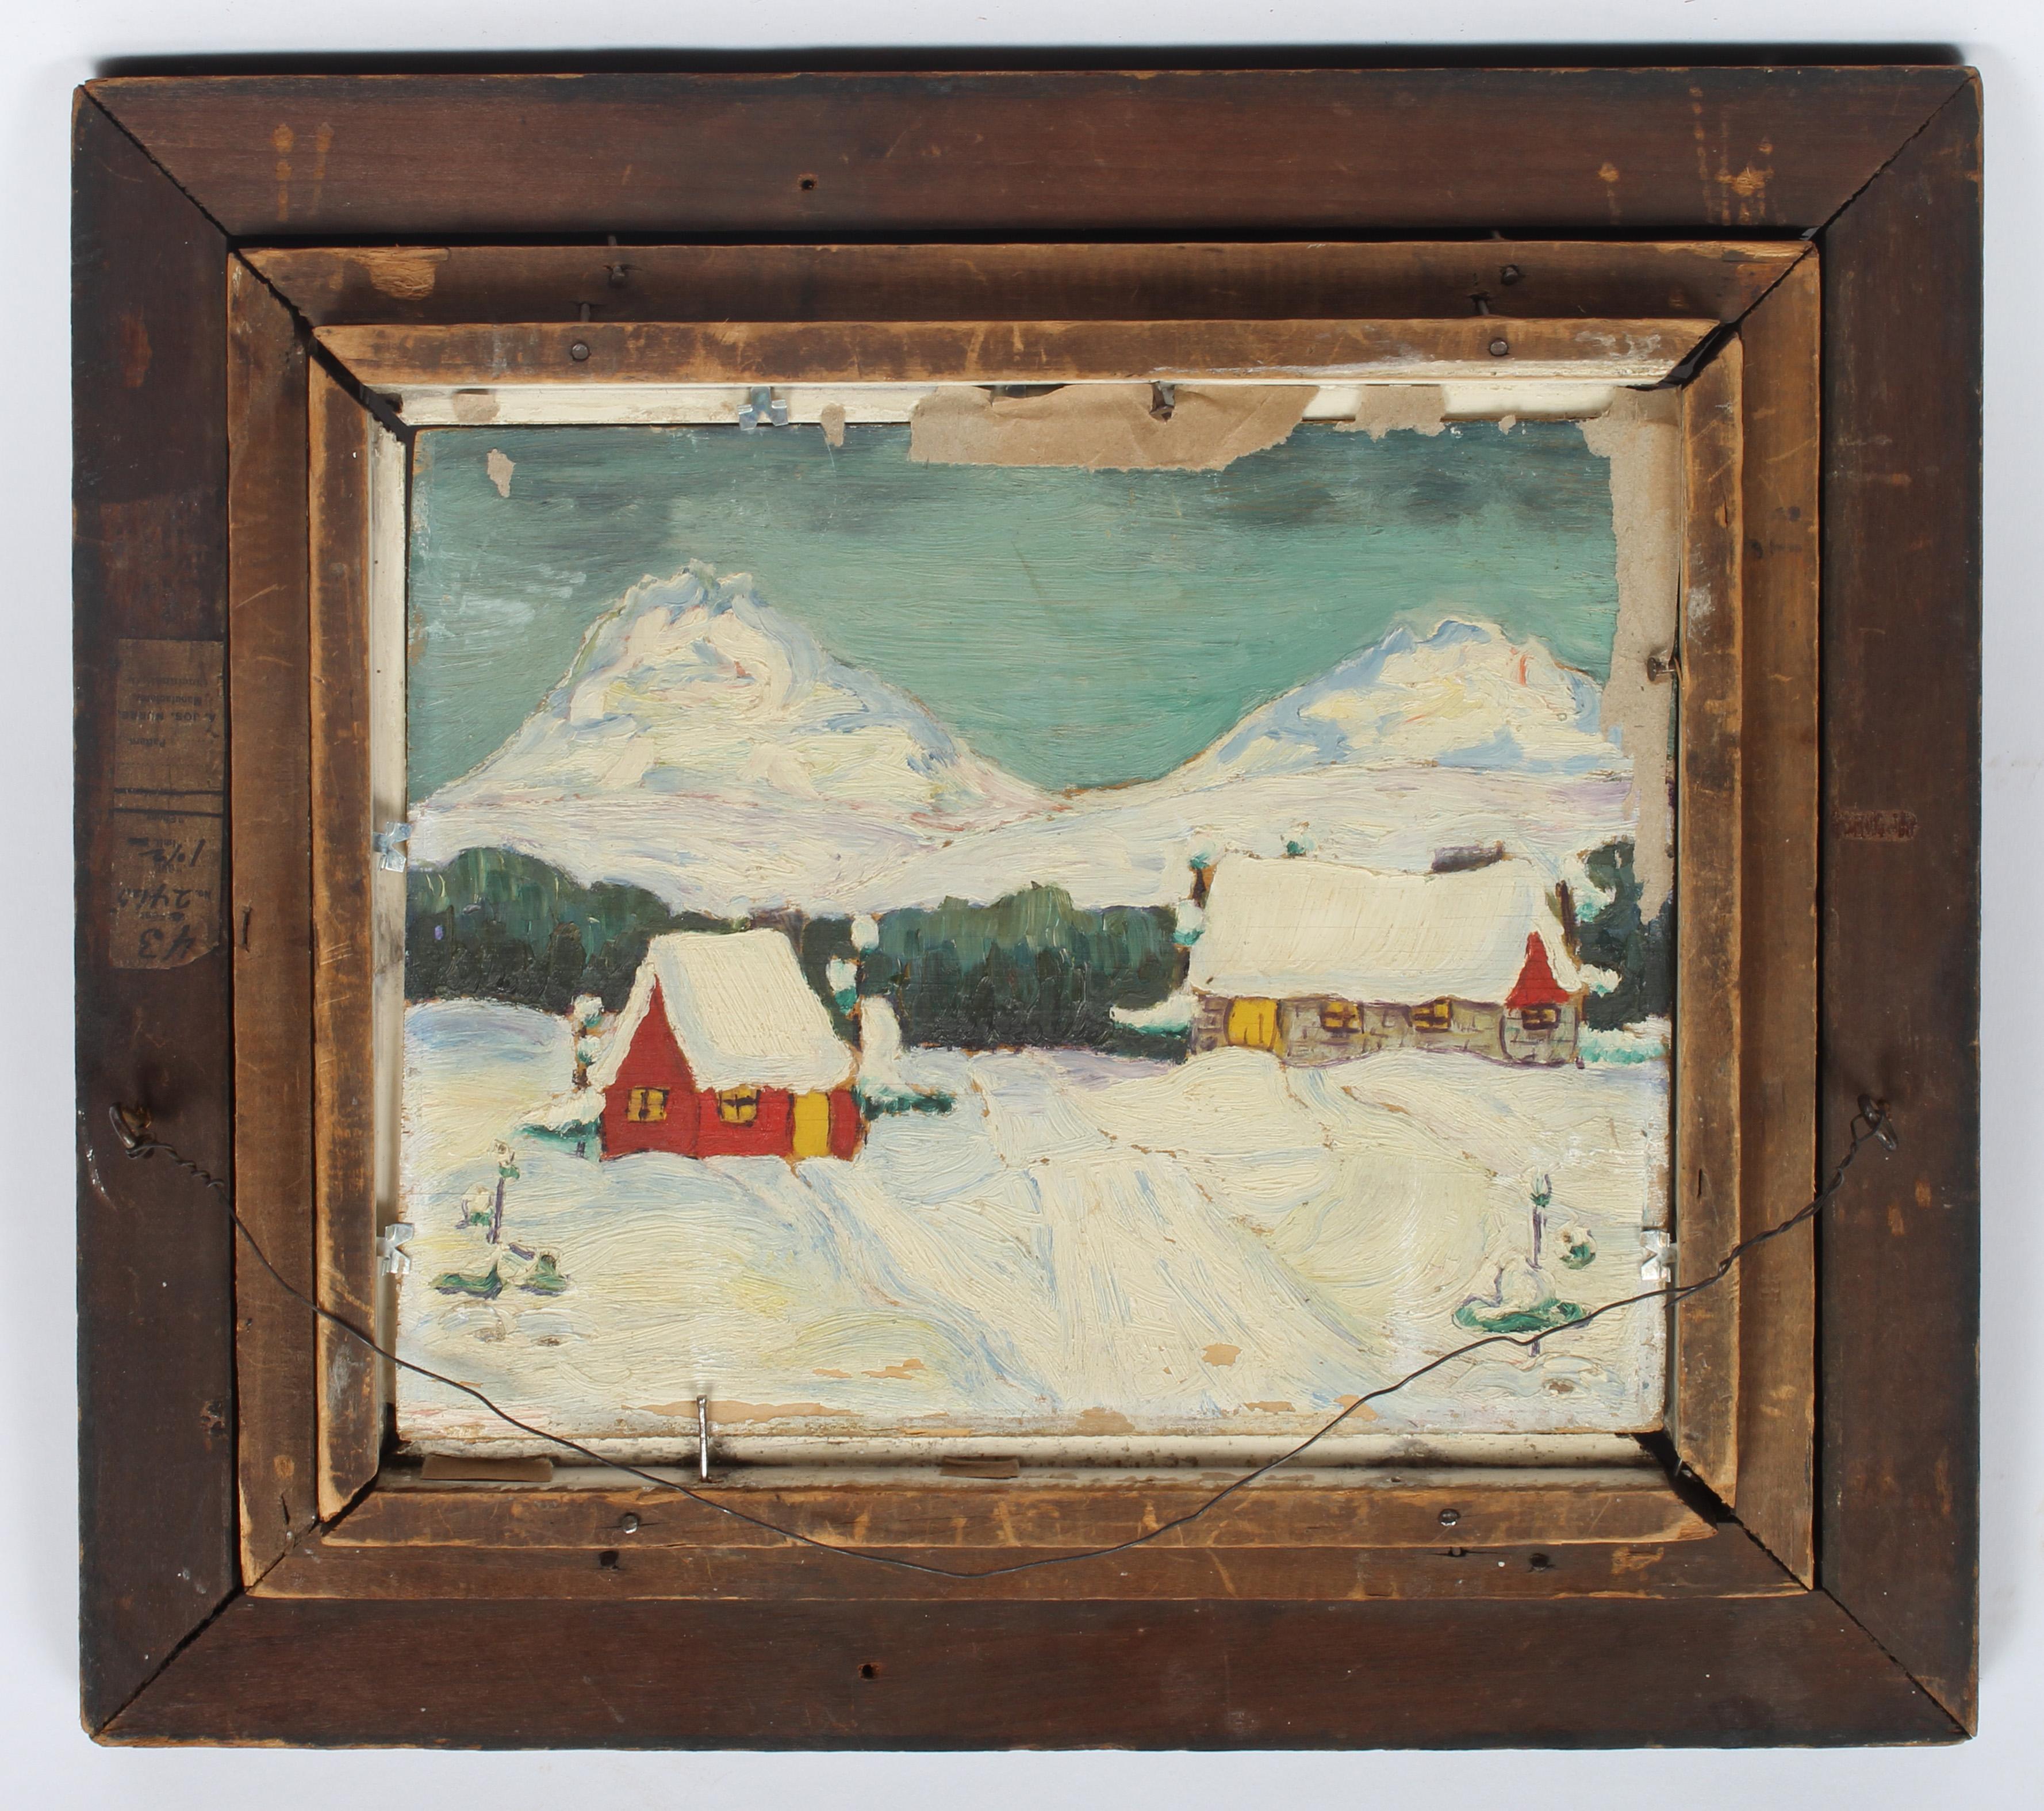 An original double-sided oil painting by an unknown modern American impressionist painter.

This whimsical work comes housed in an antique frame likely original to the piece.  The front side is titled 